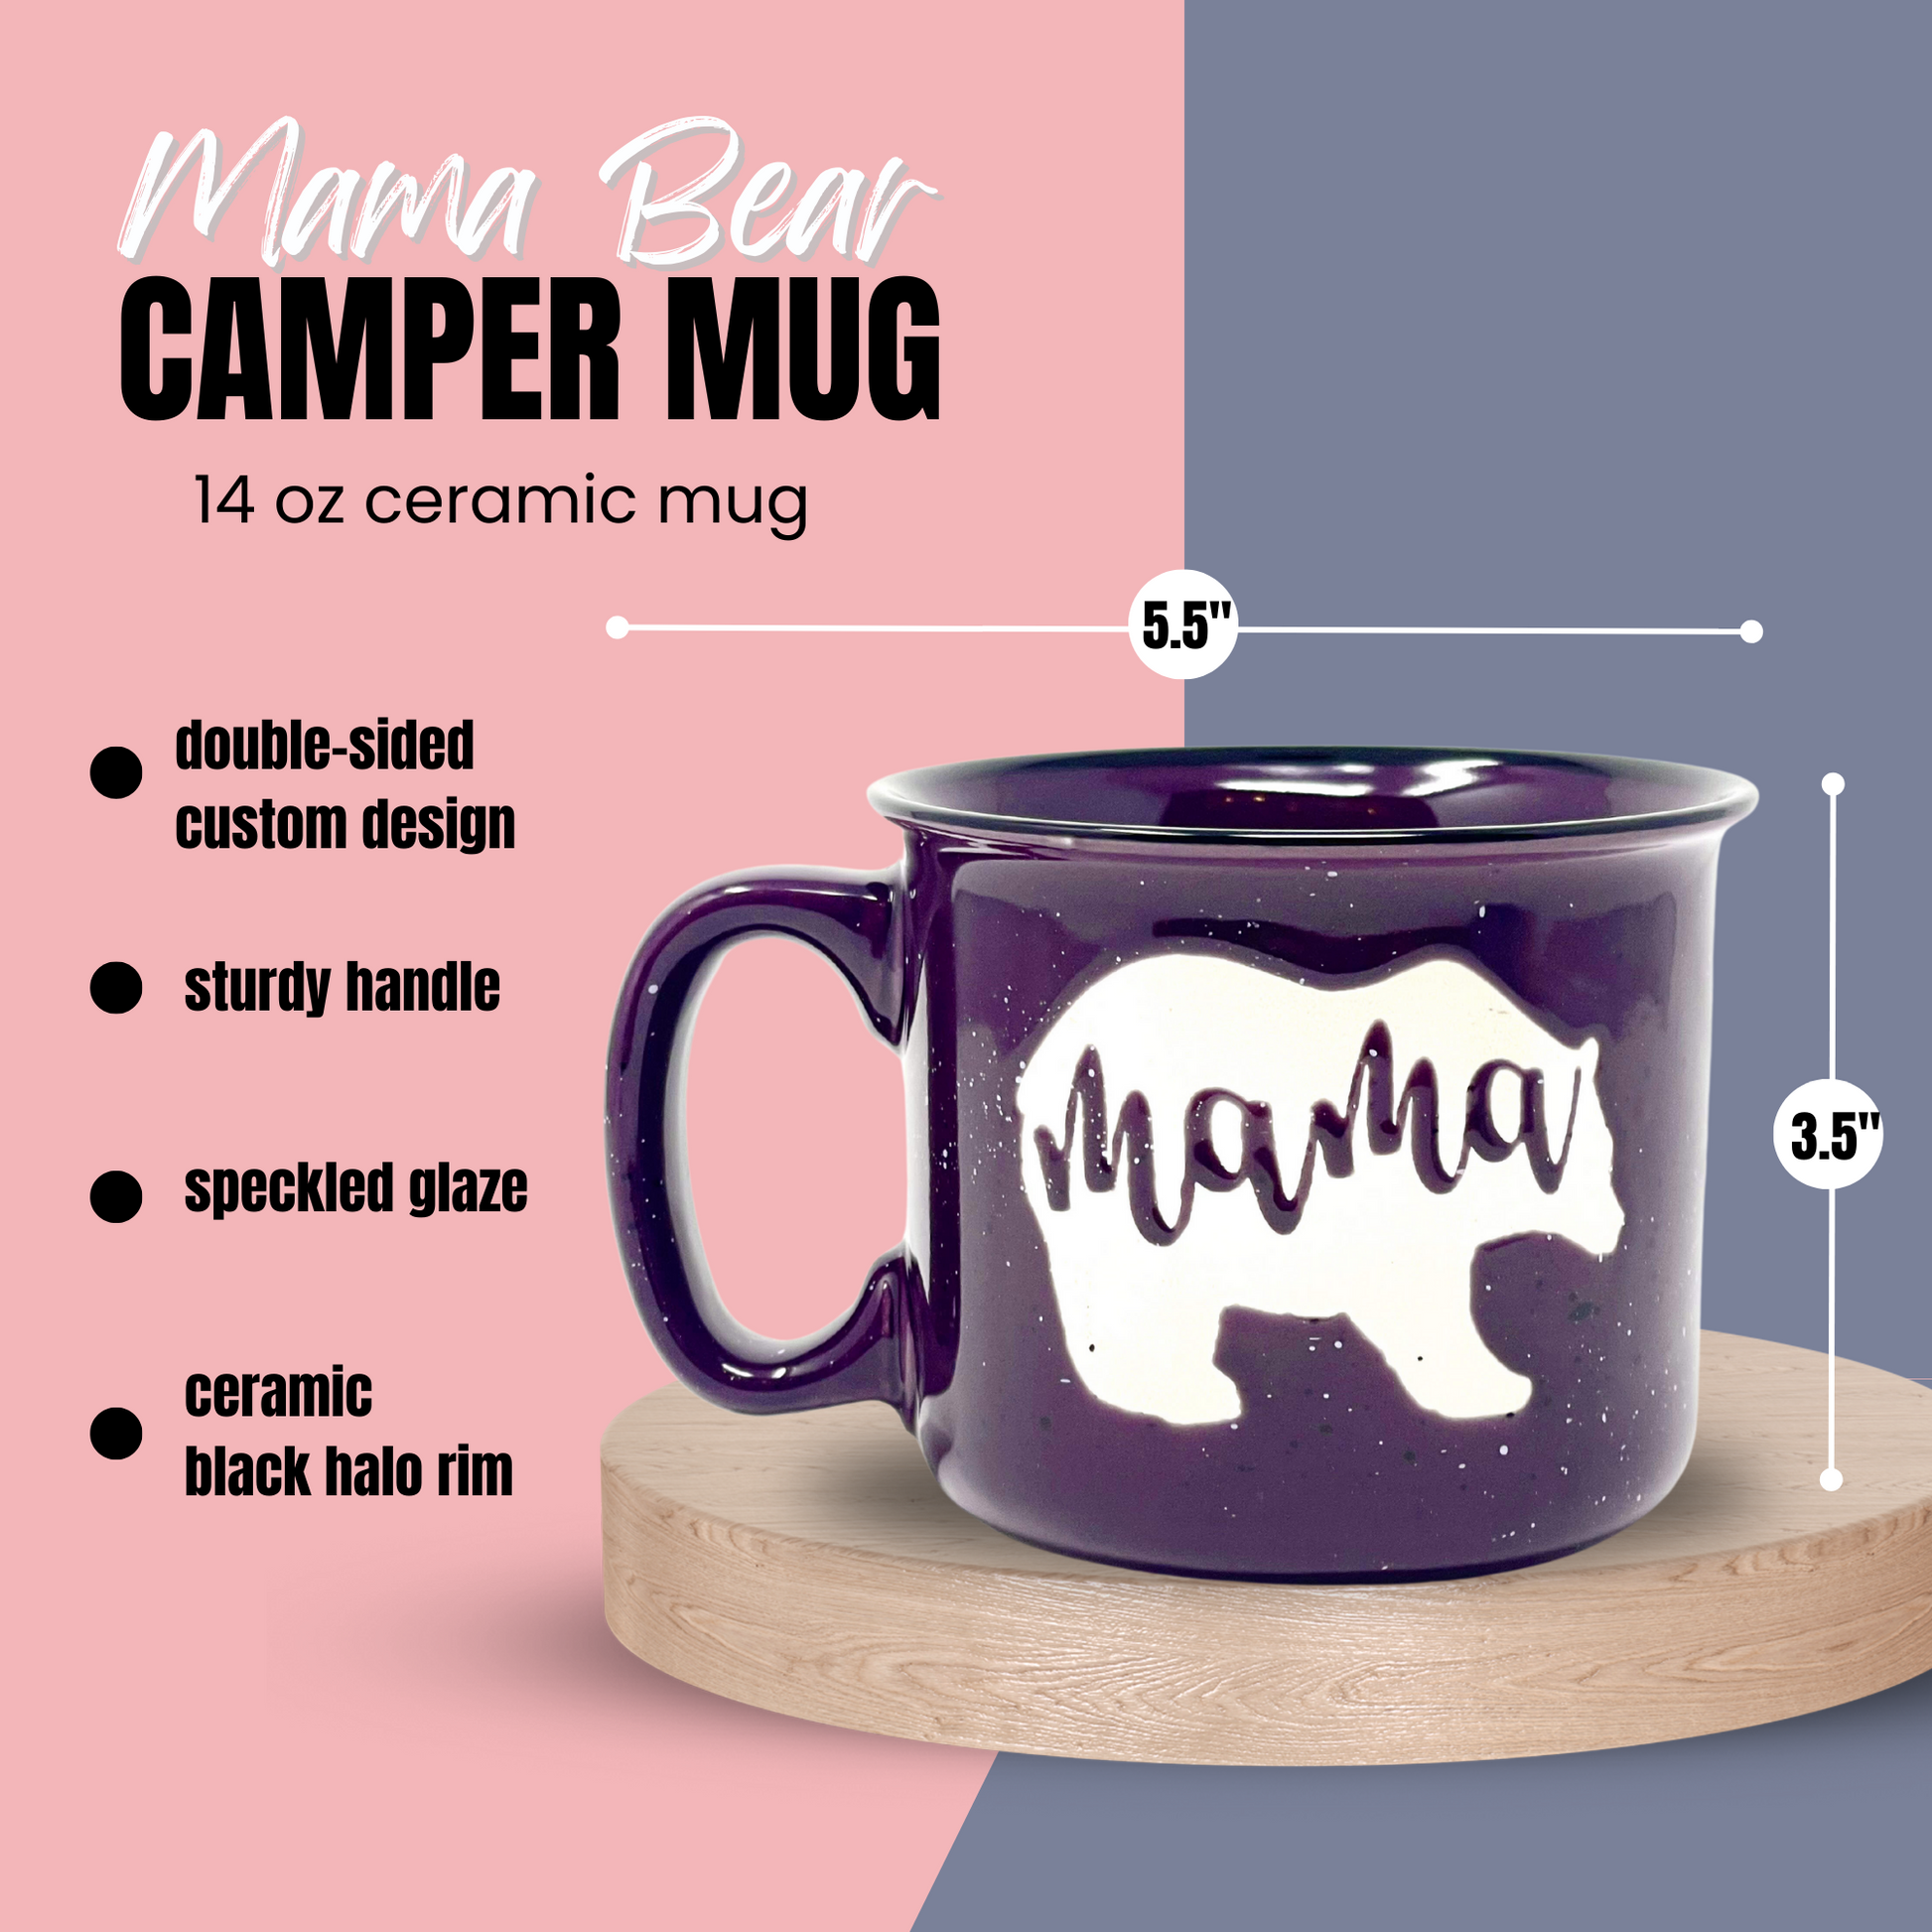 Mama Needs Coffee Sublimation Beer Can Glass Cup — Eleven 14 Designs